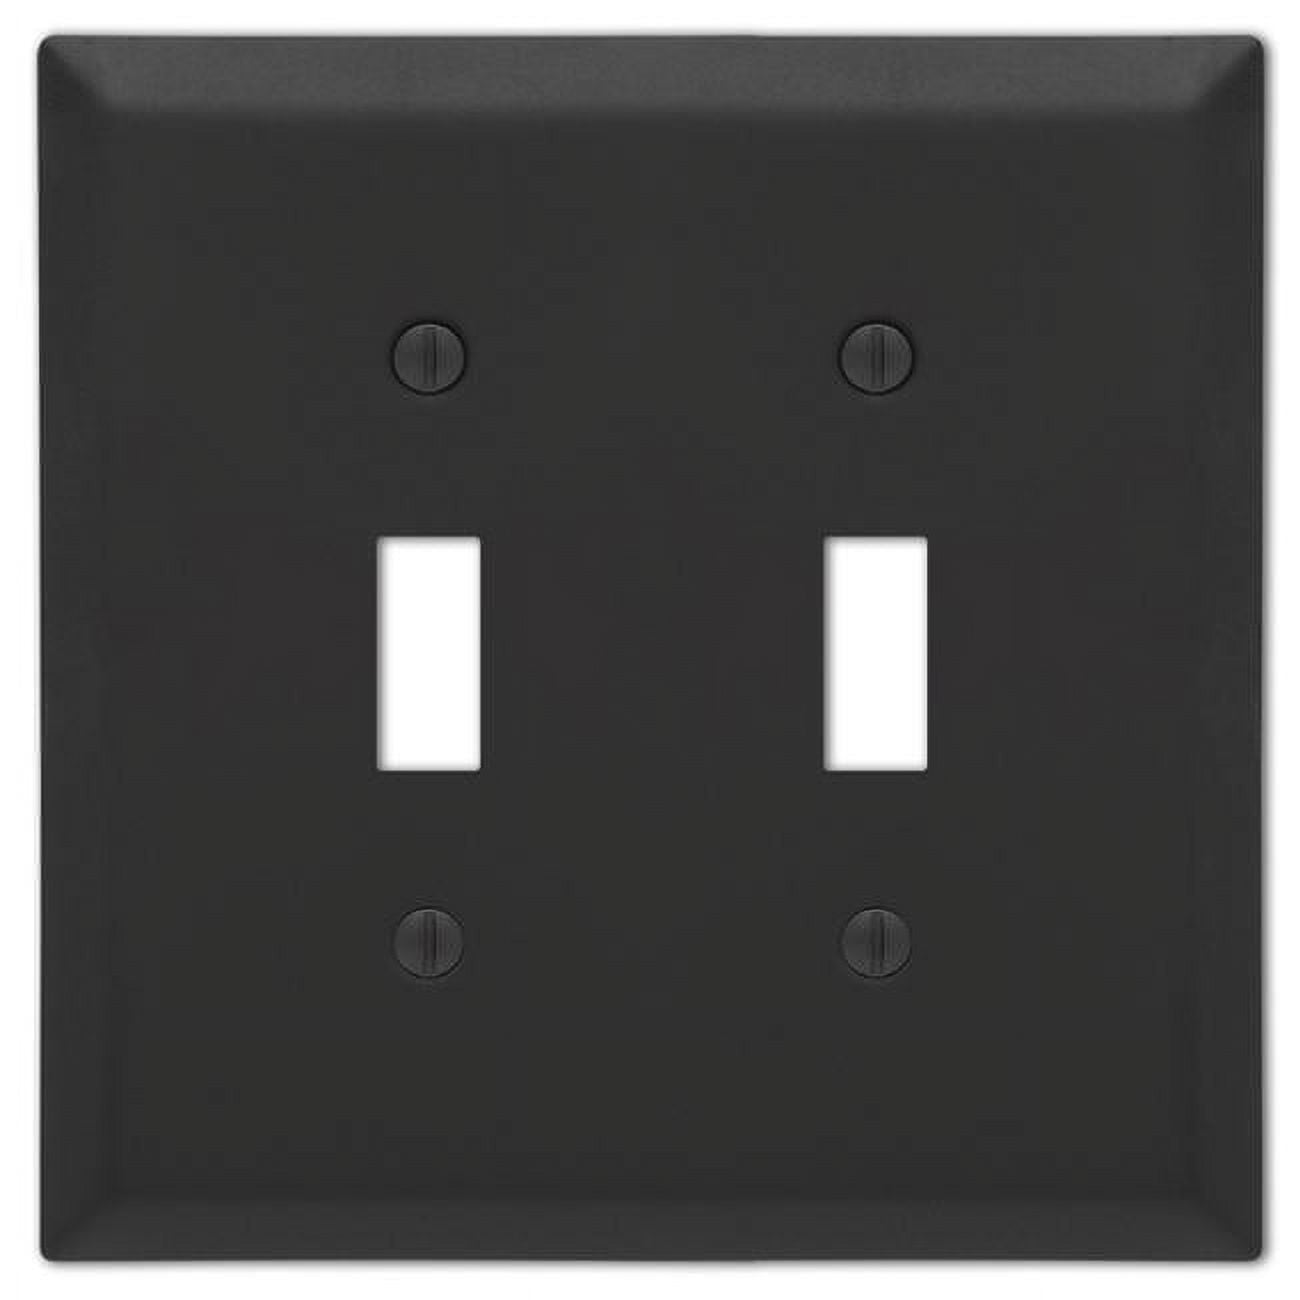 Picture of Amerelle 3003173 Century Matte Black 2-Gang Stamped Steel Toggle Wall Plate